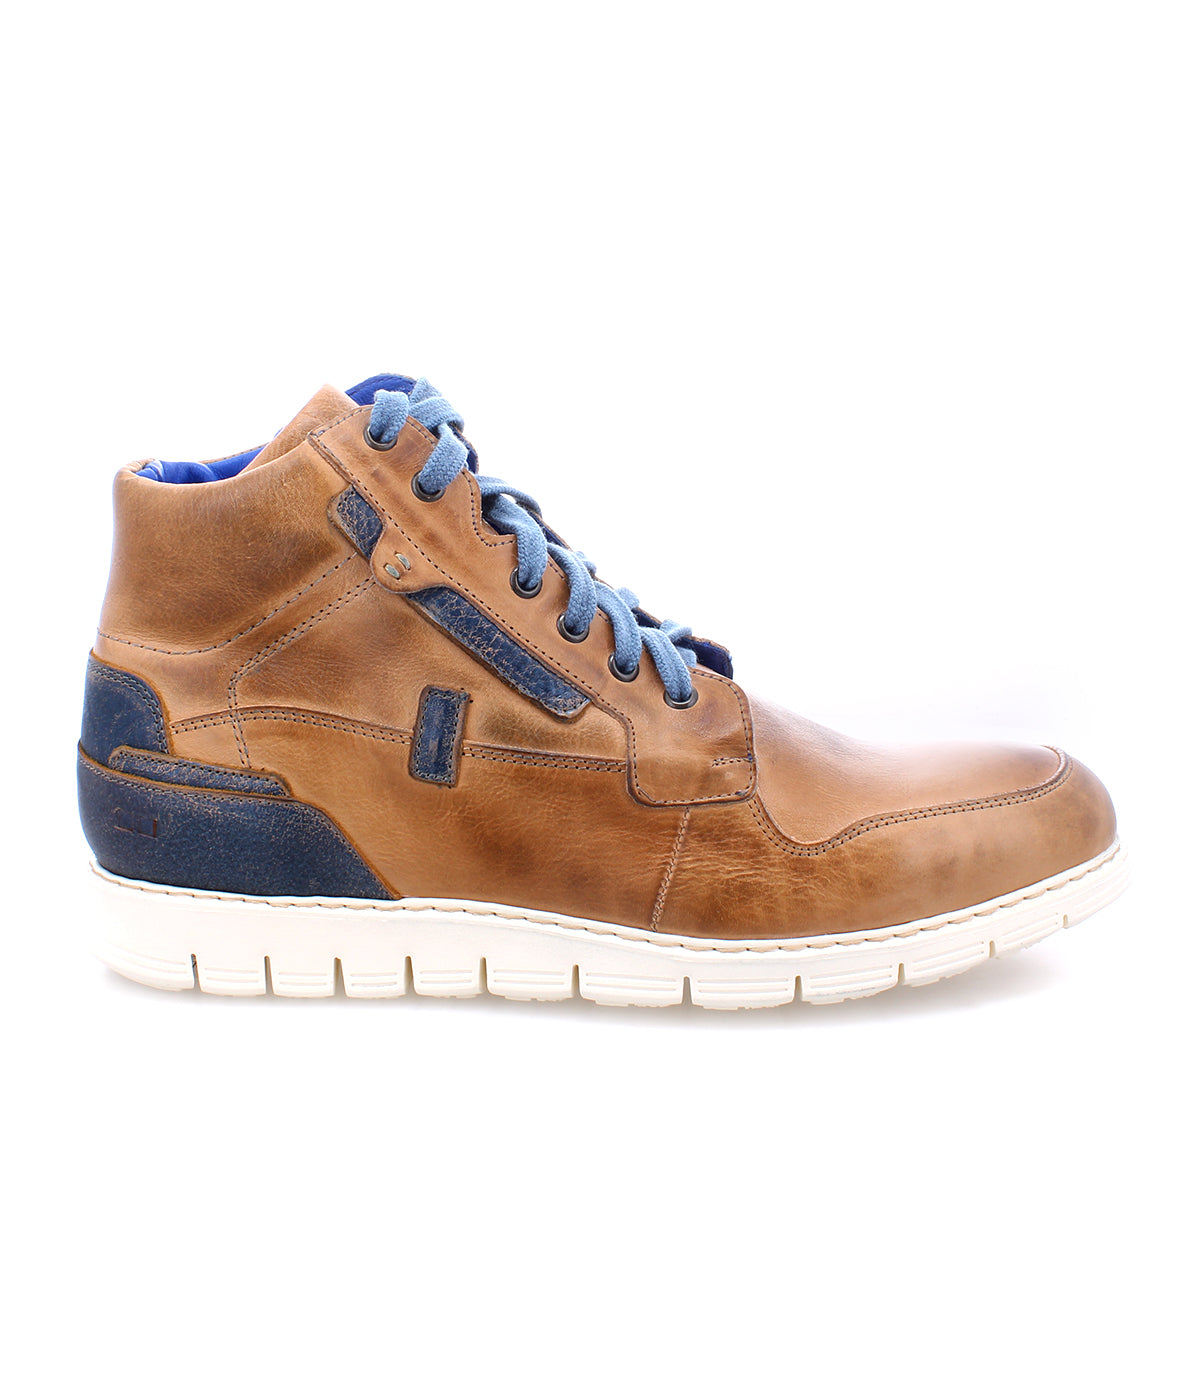 A men's brown leather sneaker with blue laces, featuring a comfortable insole for all-day wear from Bed Stu's Galahad.